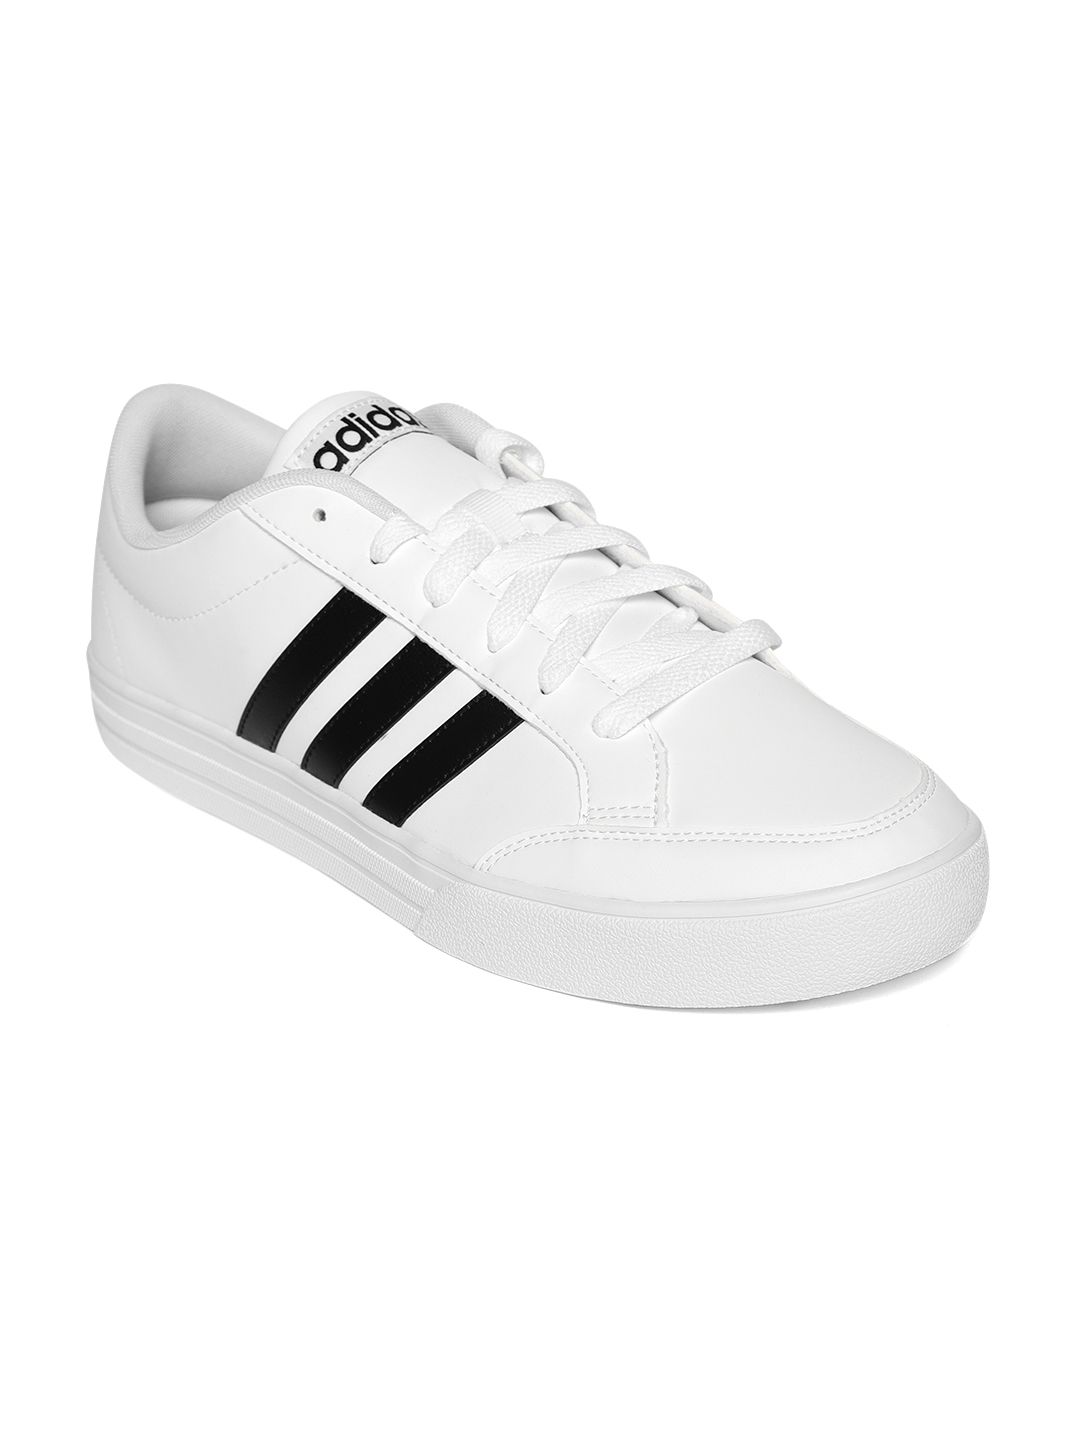 Adidas Response Approach Str White Tennis Shoes for Men online in India ...